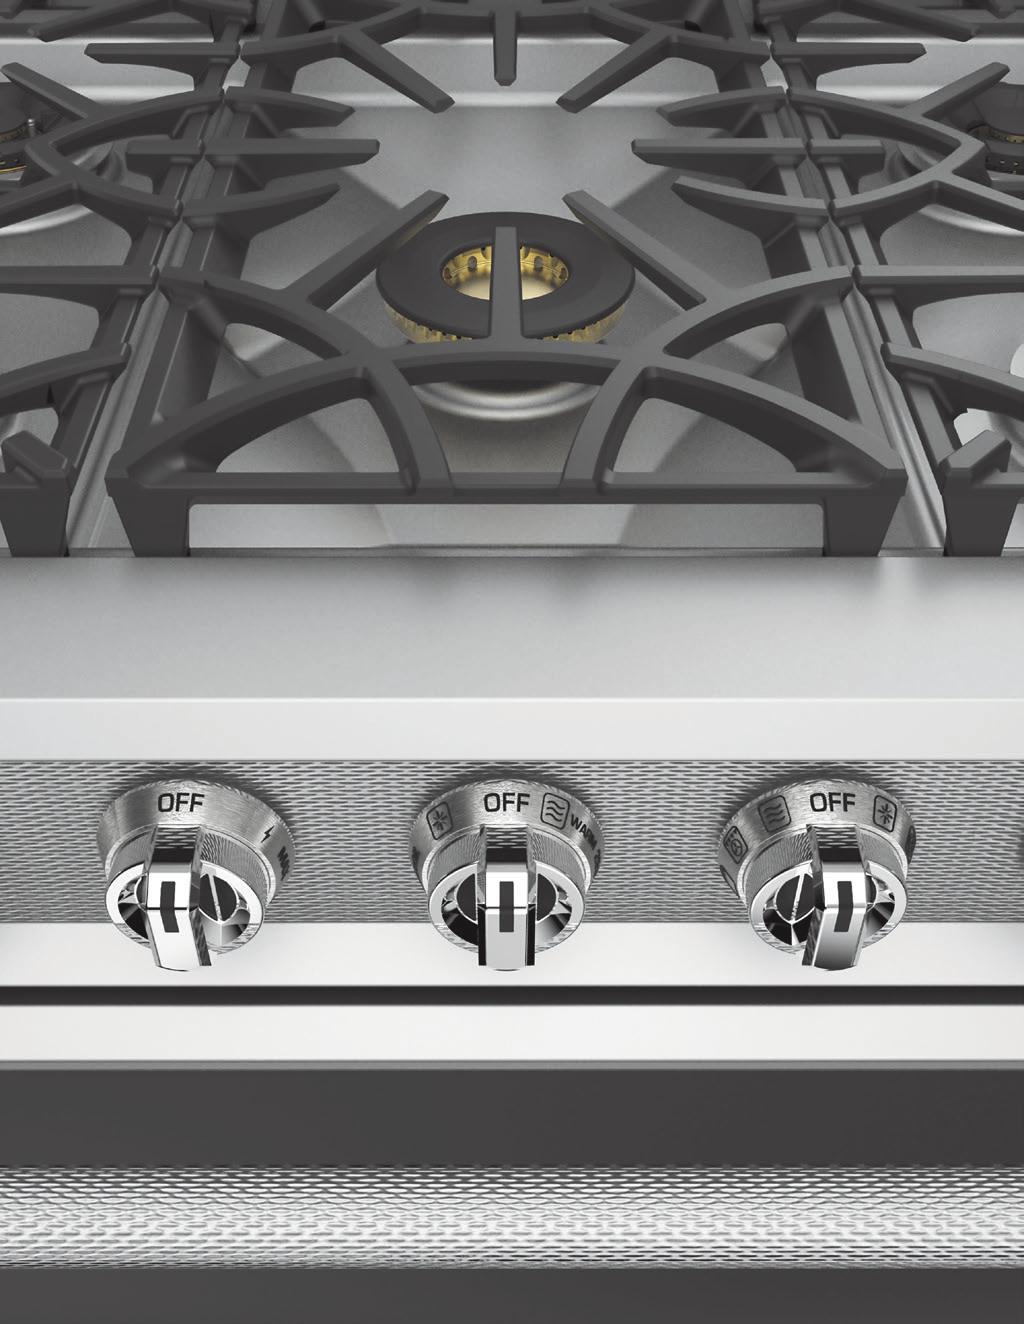 CHEF-PROVEN PERFORMANCE. The Hestan team spent years working alongside America s most celebrated chefs.